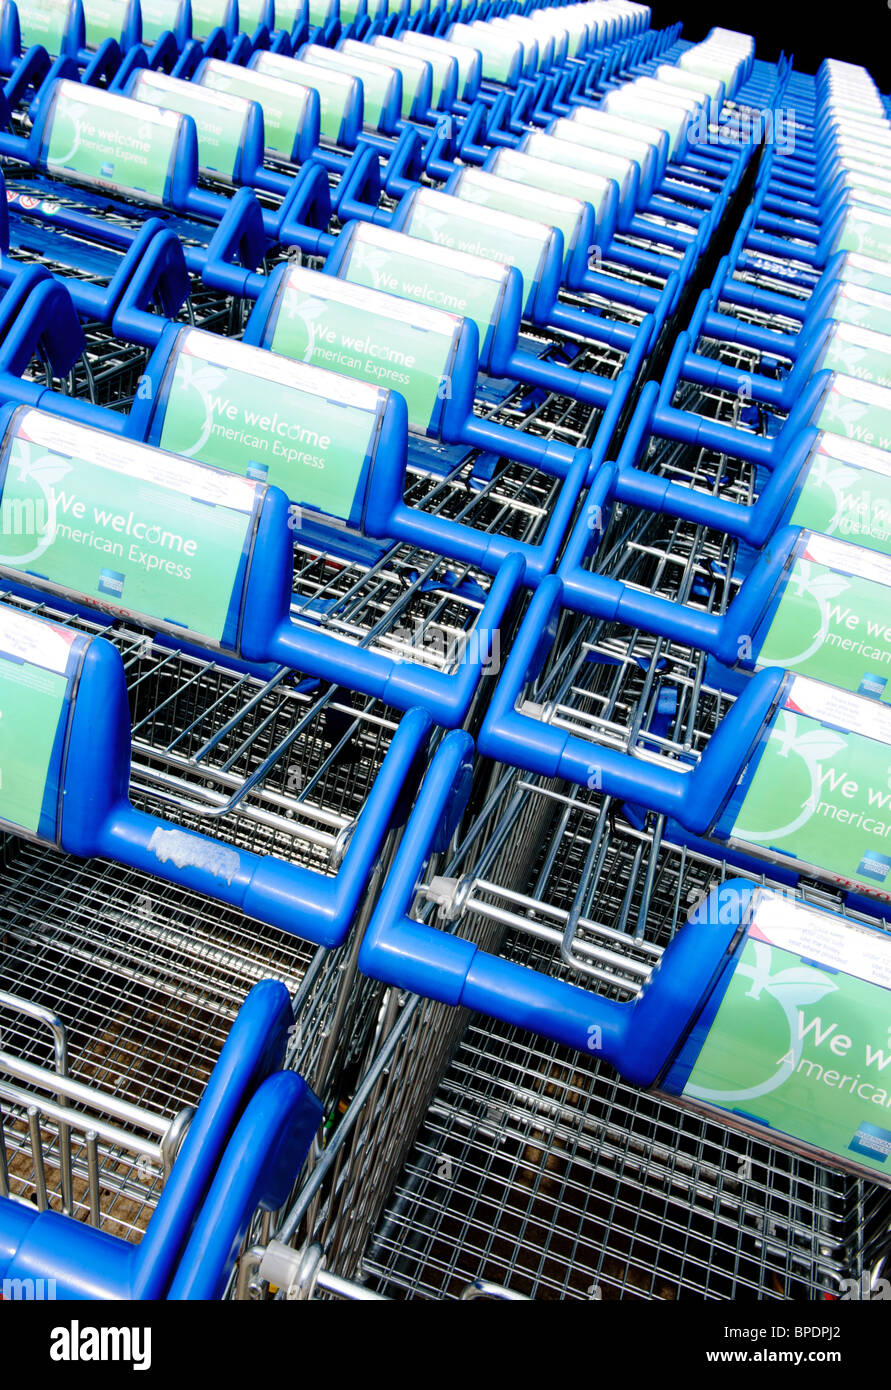 Several shoppings trolleys parked up in a line outside a Tesco supermarket Stock Photo